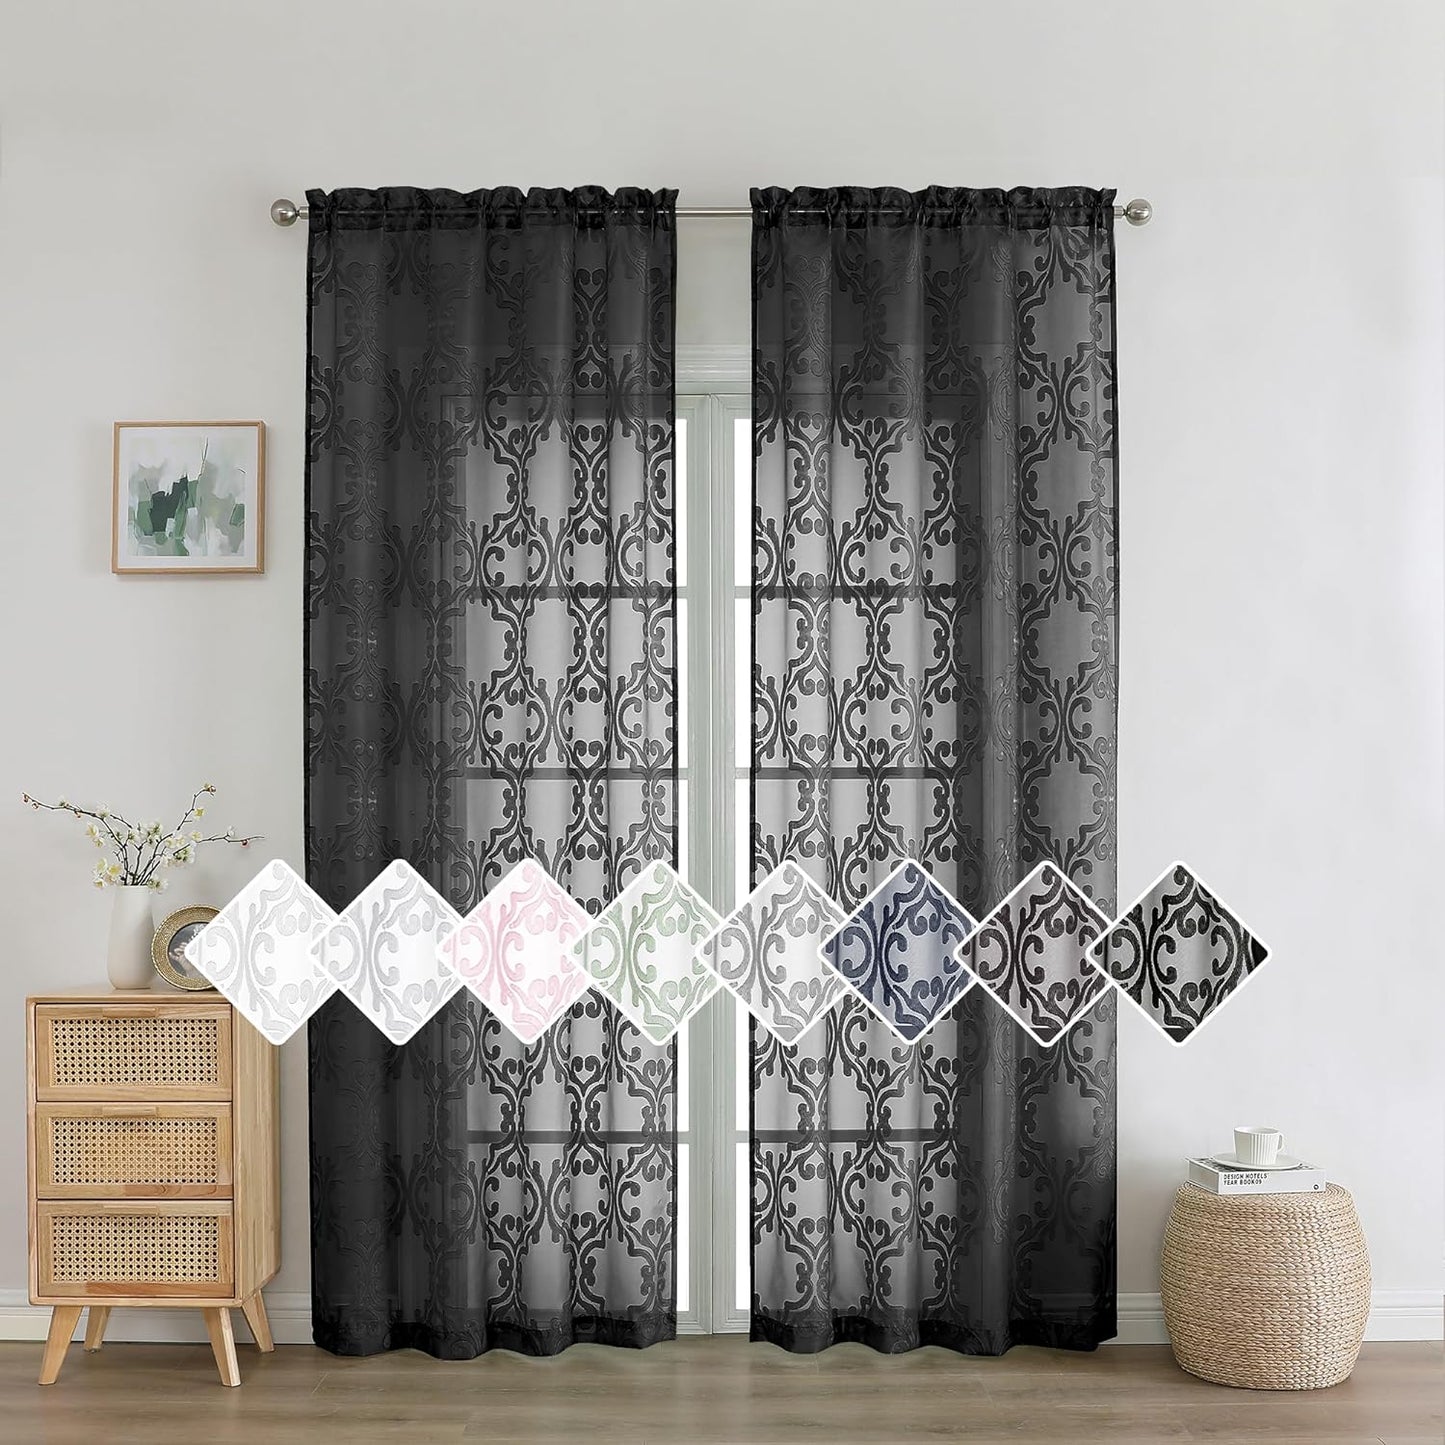 Aiyufeng Suri 2 Panels Sheer Sage Green Curtains 63 Inches Long, Light & Airy Privacy Textured Sheer Drapes, Dual Rod Pocket Voile Clipped Floral Luxury Panels for Bedroom Living Room, 42 X 63 Inch  Aiyufeng Black 2X42X84" 